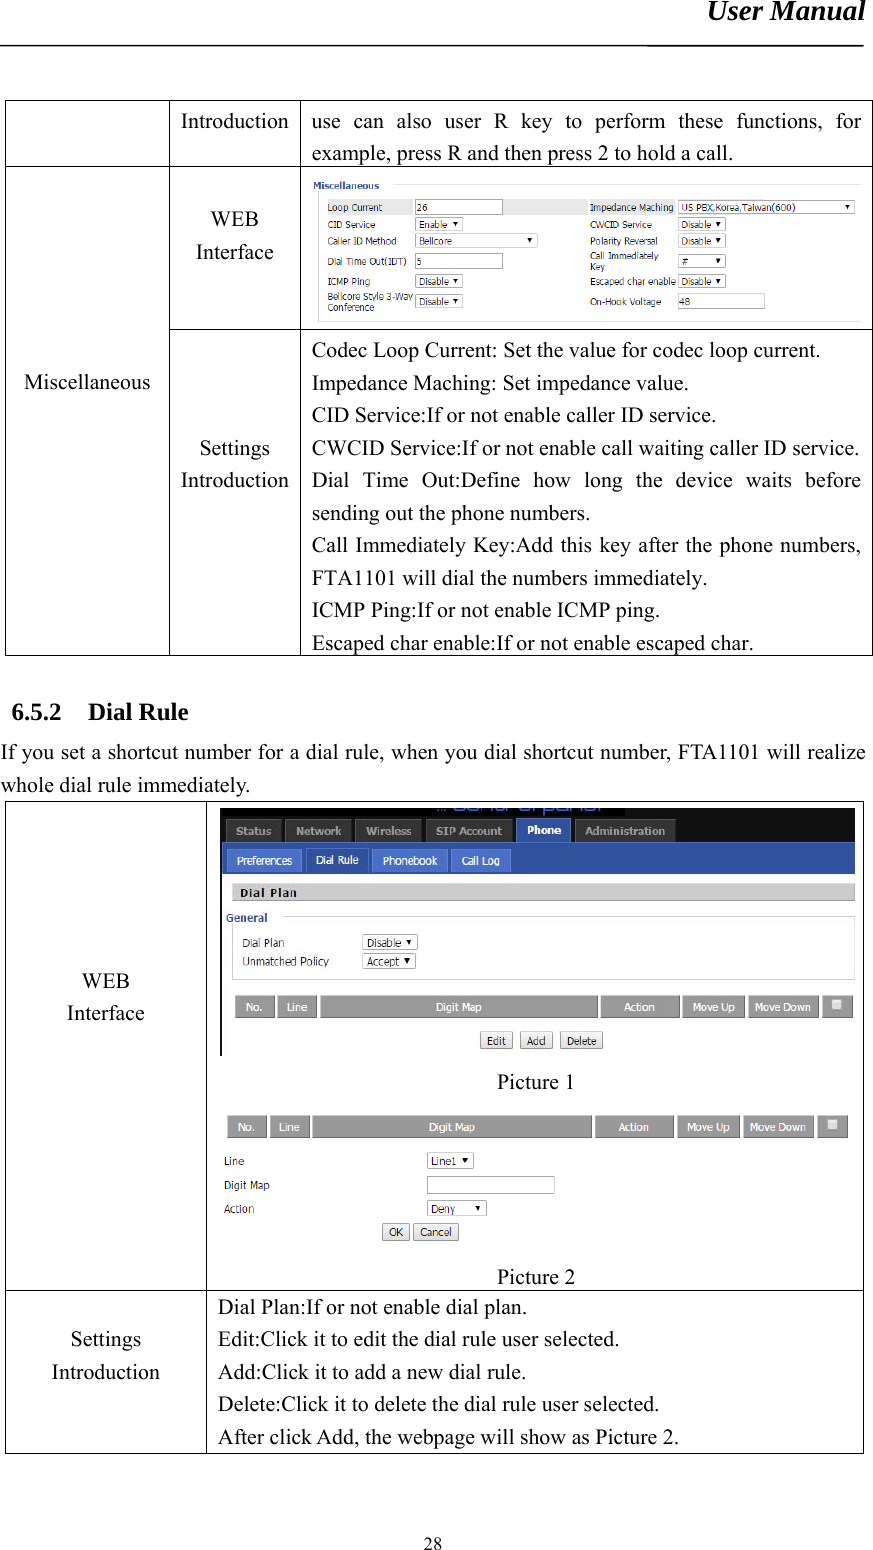 User Manual       28Introduction  use can also user R key to perform these functions, for example, press R and then press 2 to hold a call.  WEB Interface       Miscellaneous    Settings Introduction Codec Loop Current: Set the value for codec loop current. Impedance Maching: Set impedance value. CID Service:If or not enable caller ID service. CWCID Service:If or not enable call waiting caller ID service.Dial Time Out:Define how long the device waits before sending out the phone numbers. Call Immediately Key:Add this key after the phone numbers, FTA1101 will dial the numbers immediately. ICMP Ping:If or not enable ICMP ping. Escaped char enable:If or not enable escaped char.  6.5.2 Dial Rule If you set a shortcut number for a dial rule, when you dial shortcut number, FTA1101 will realize whole dial rule immediately.      WEB Interface Picture 1 Picture 2  Settings  Introduction Dial Plan:If or not enable dial plan. Edit:Click it to edit the dial rule user selected. Add:Click it to add a new dial rule. Delete:Click it to delete the dial rule user selected. After click Add, the webpage will show as Picture 2. 